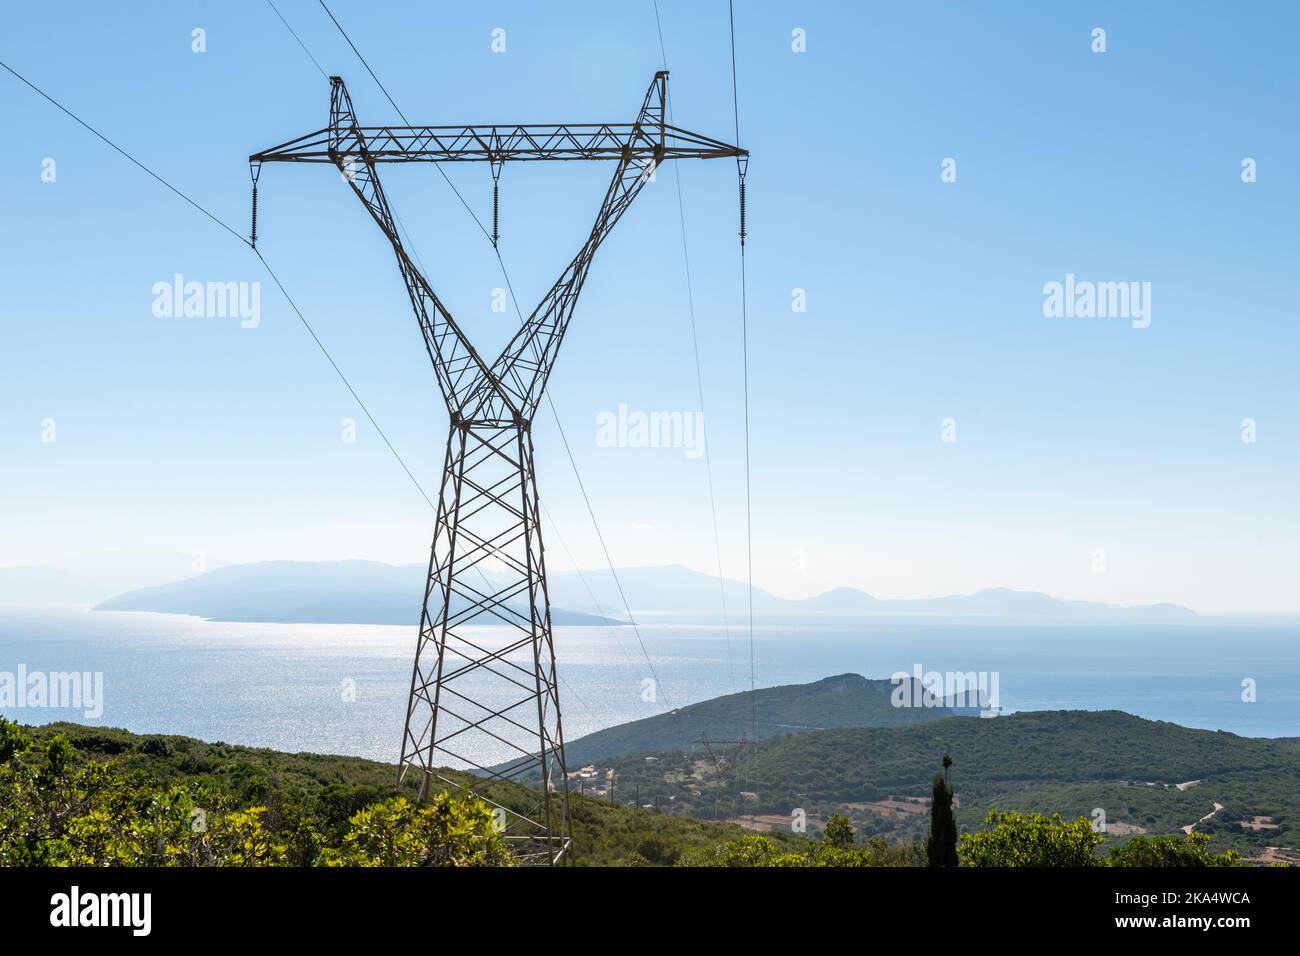 A electricity transmission tower with a view of the sea and island. Stock Photo